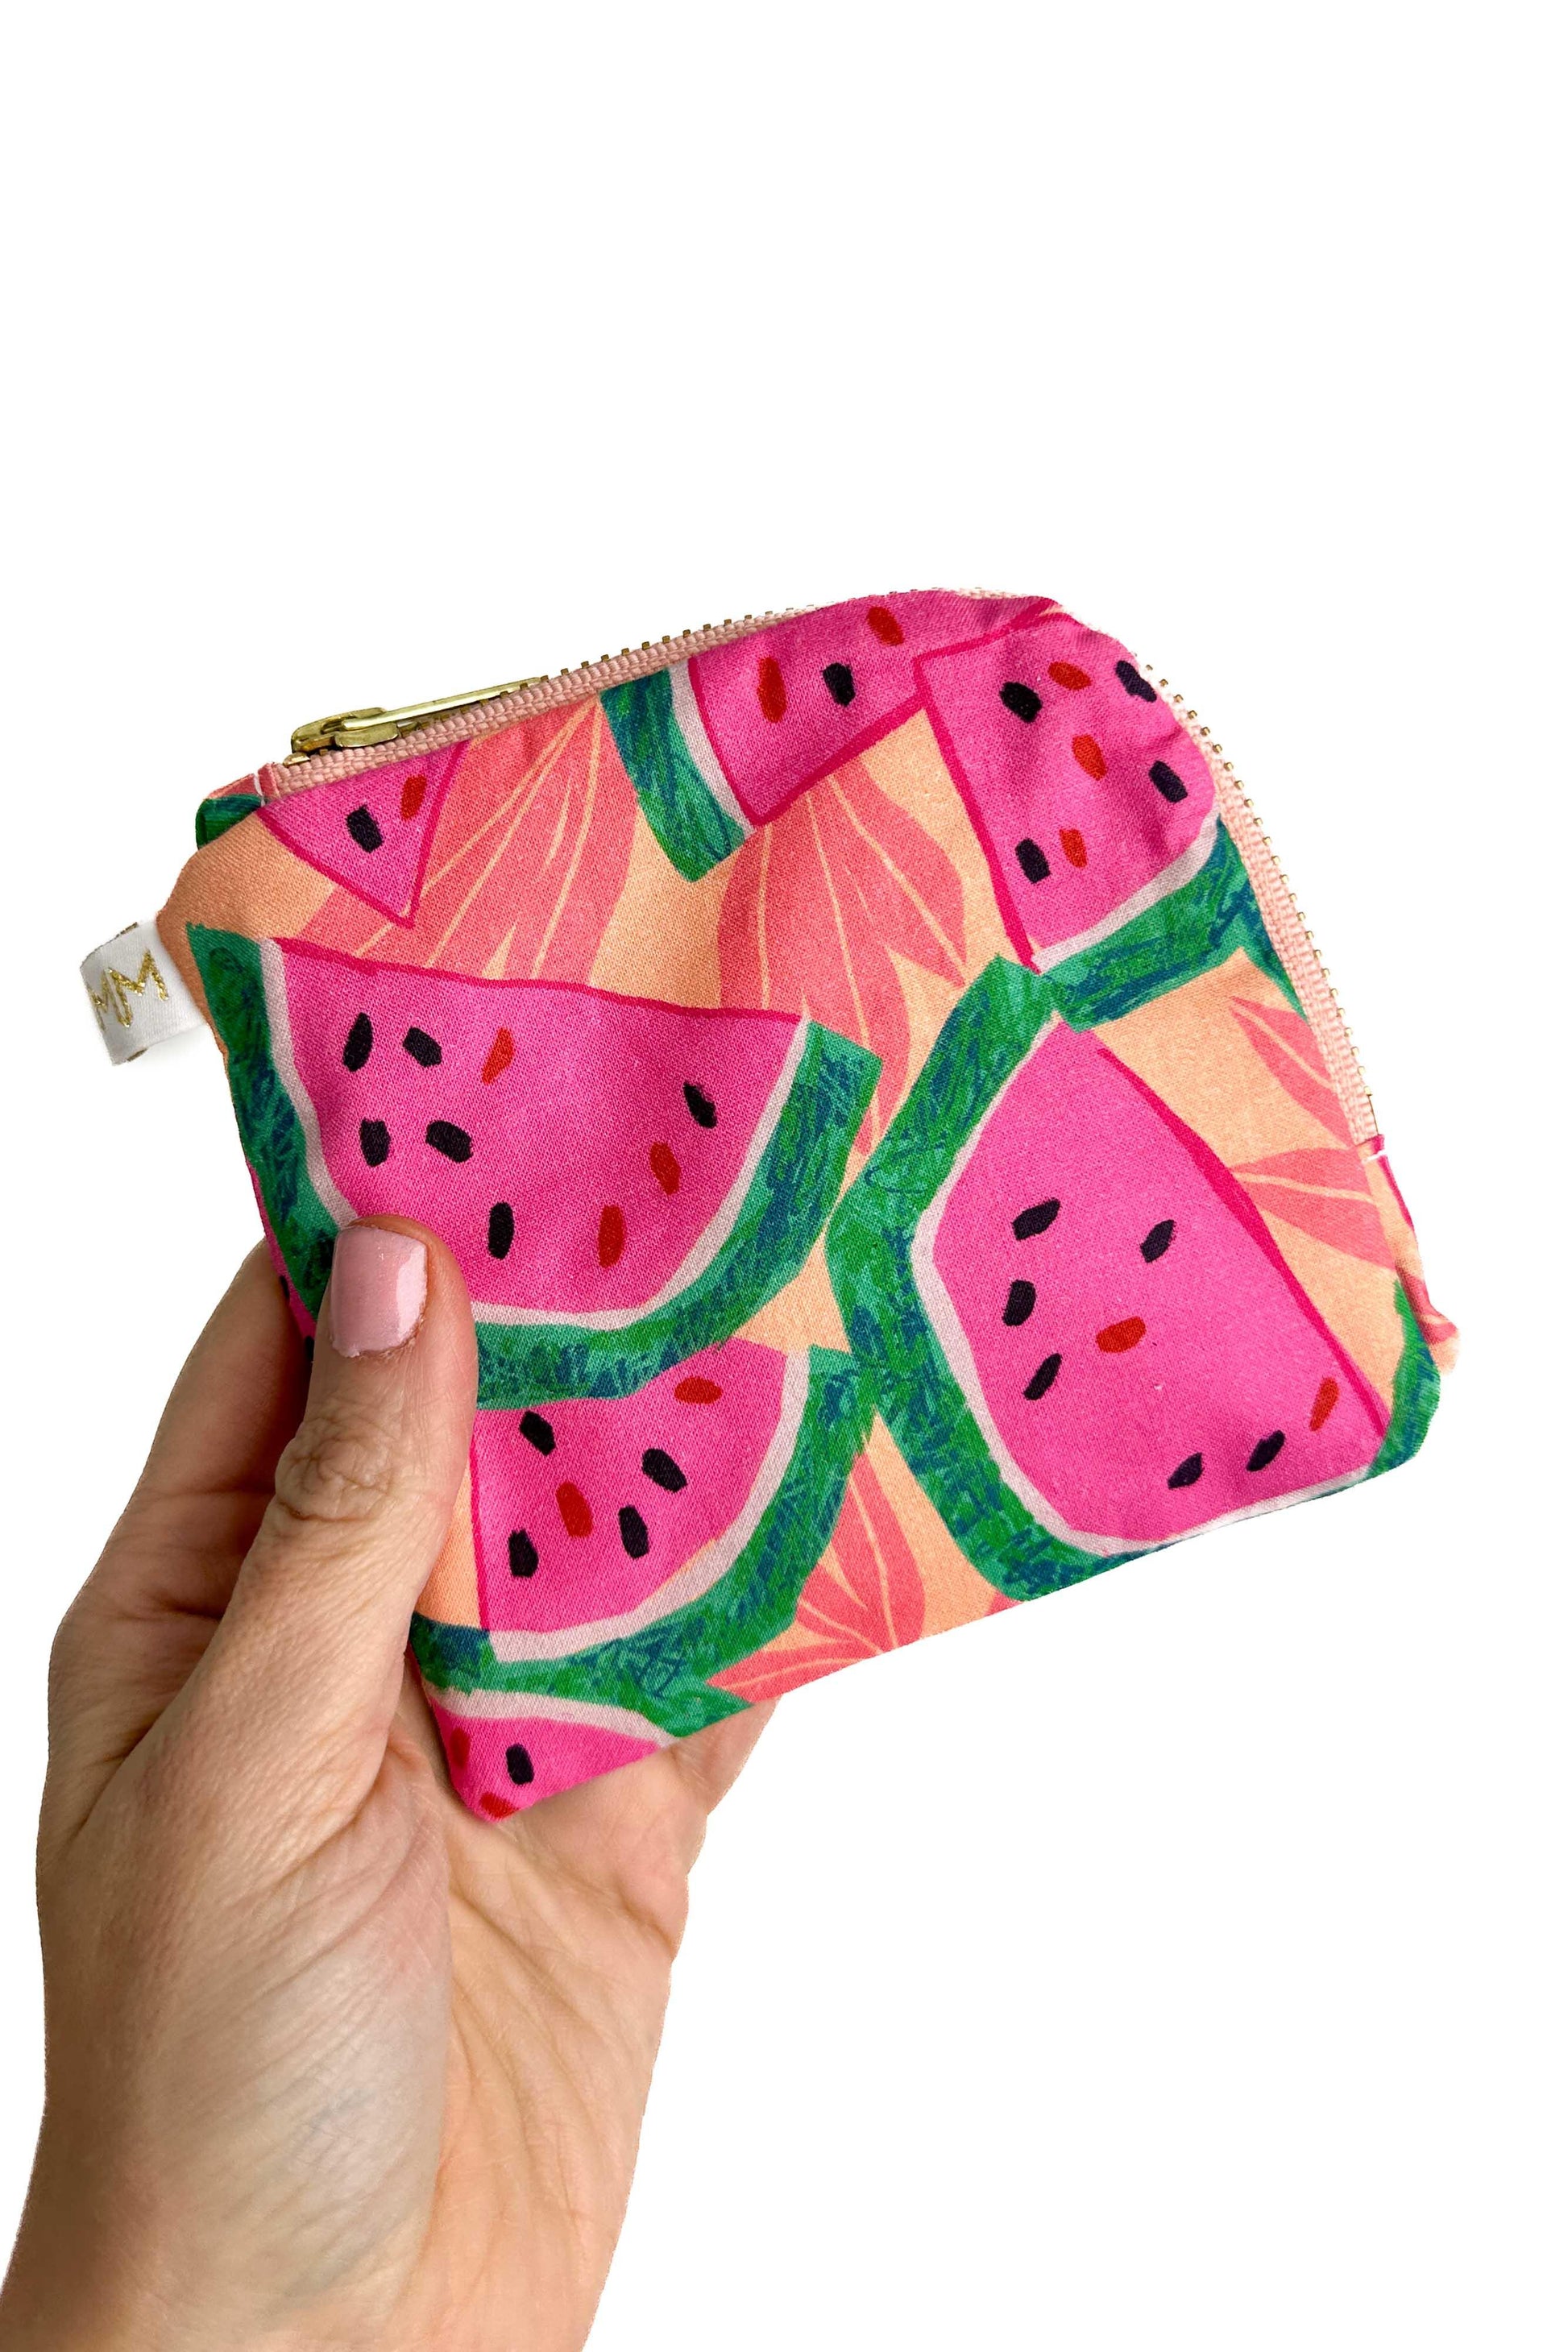 Watermelon Mini Travel Bag with Compartments READY TO SHIP - Modern Makerie